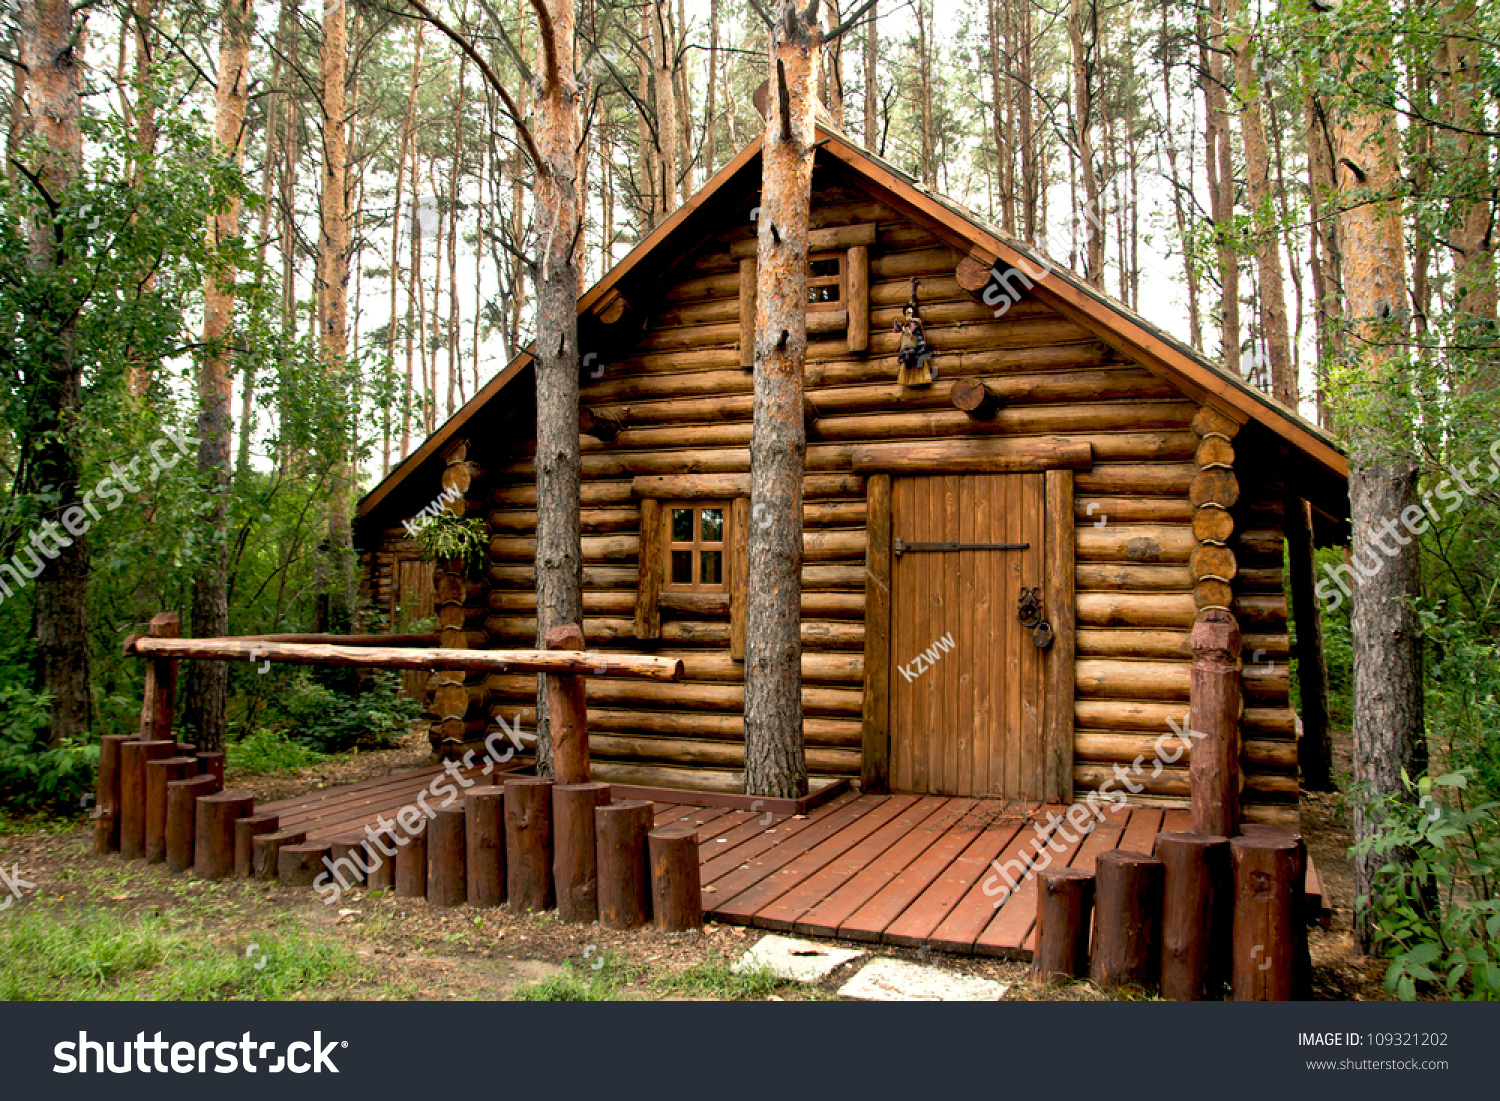 Wooden House In The Woods Stock Photo 109321202 : Shutterstock